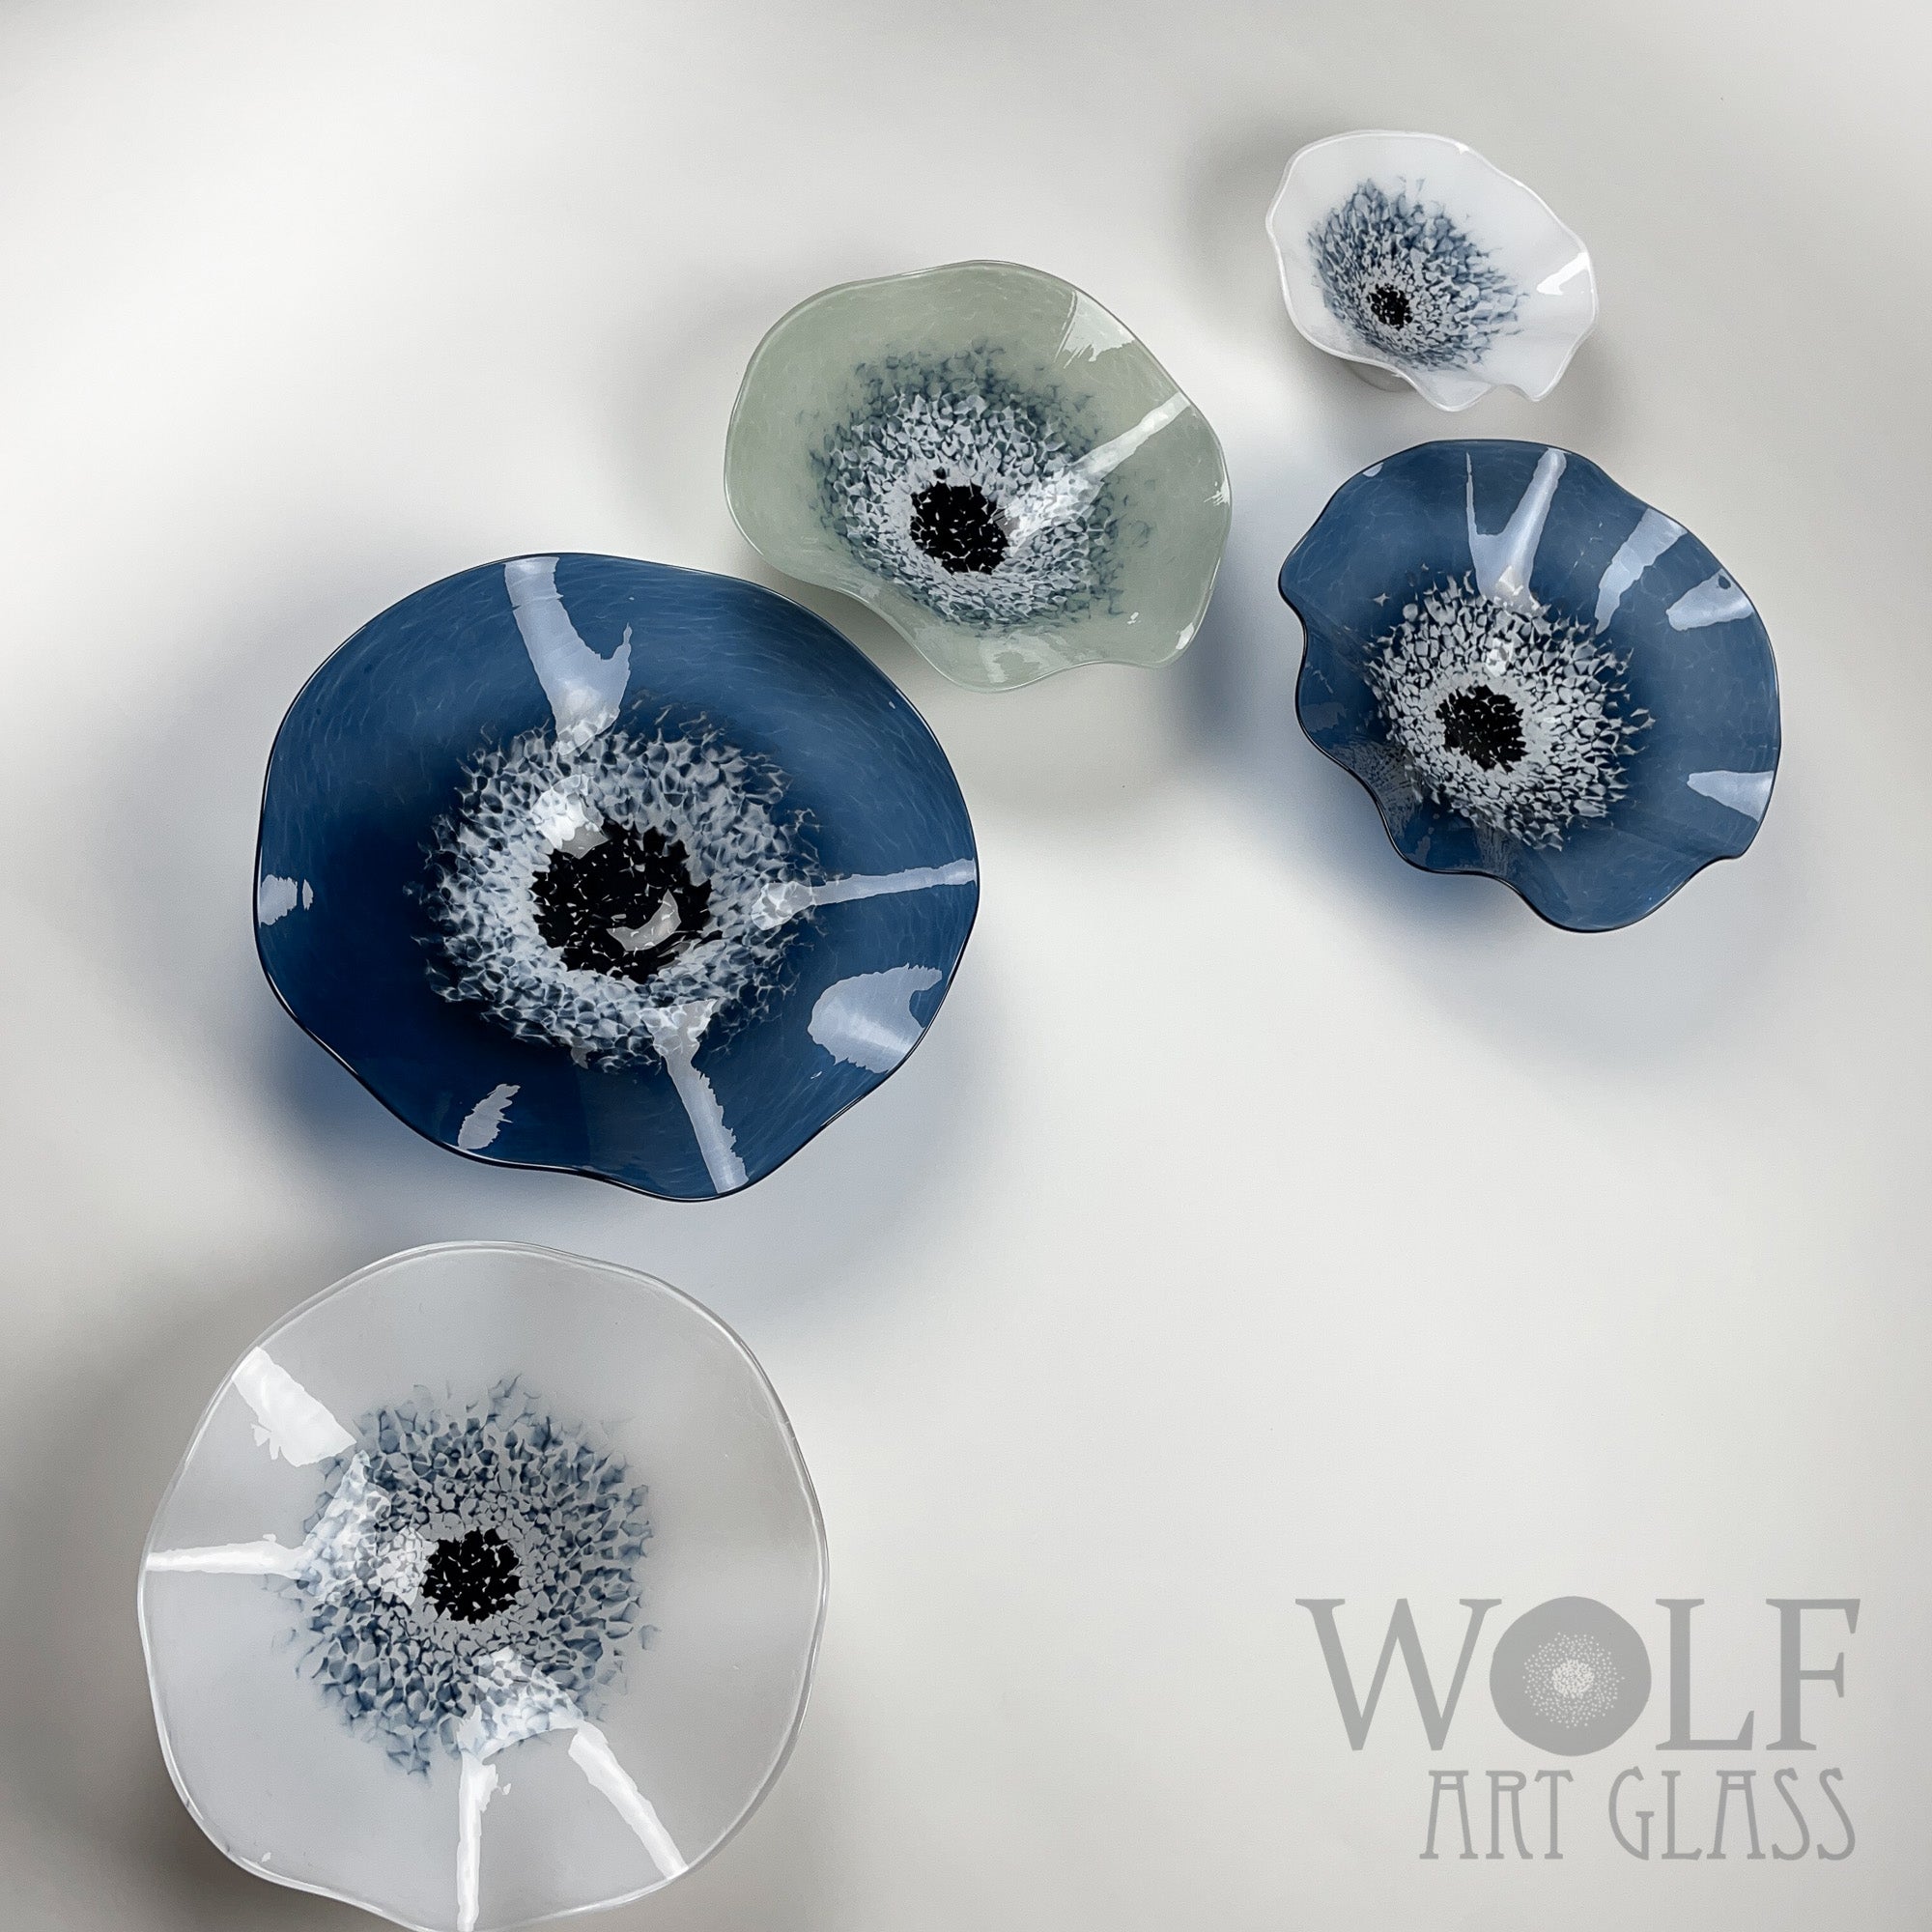 Blown Glass Flower Wall Art Collection - 5 Piece Denim Blue, White and Gray Poppy Flowers